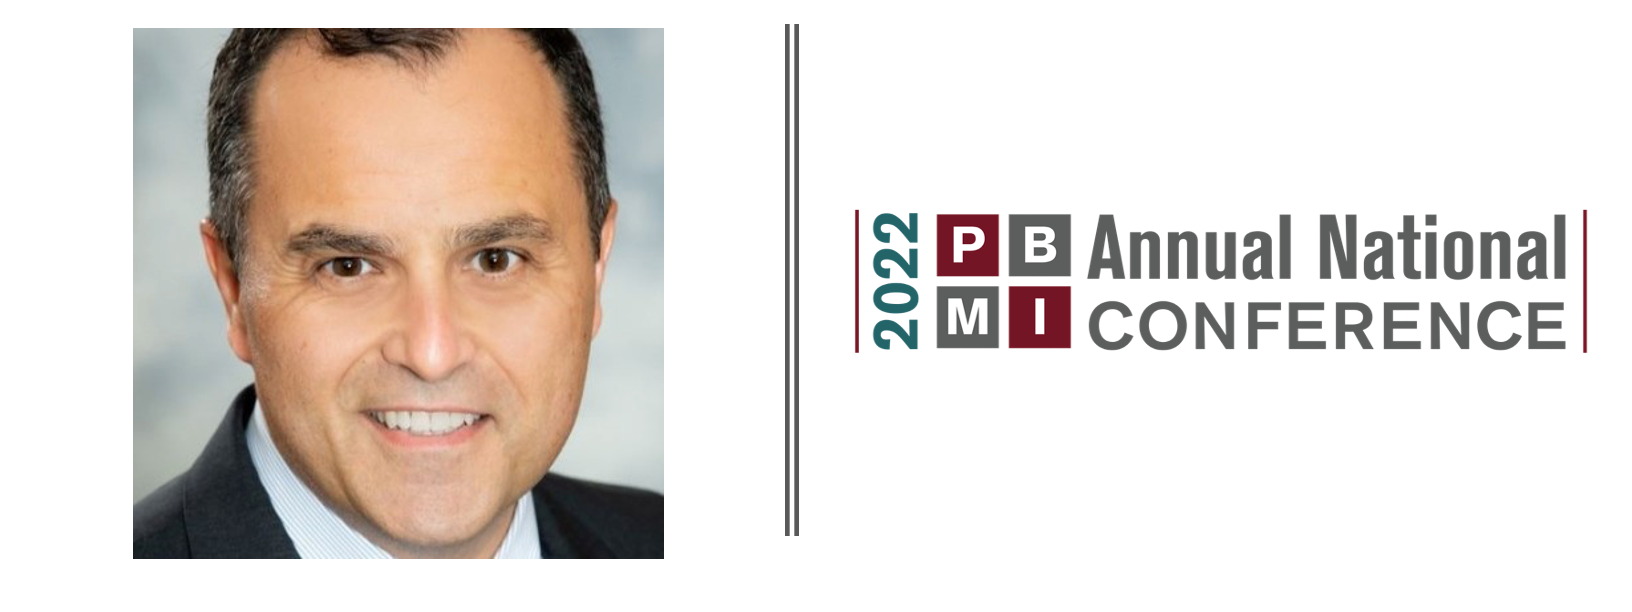  Michael Agostino Reflects on His Career as a Pharmacy Leader during PBMI